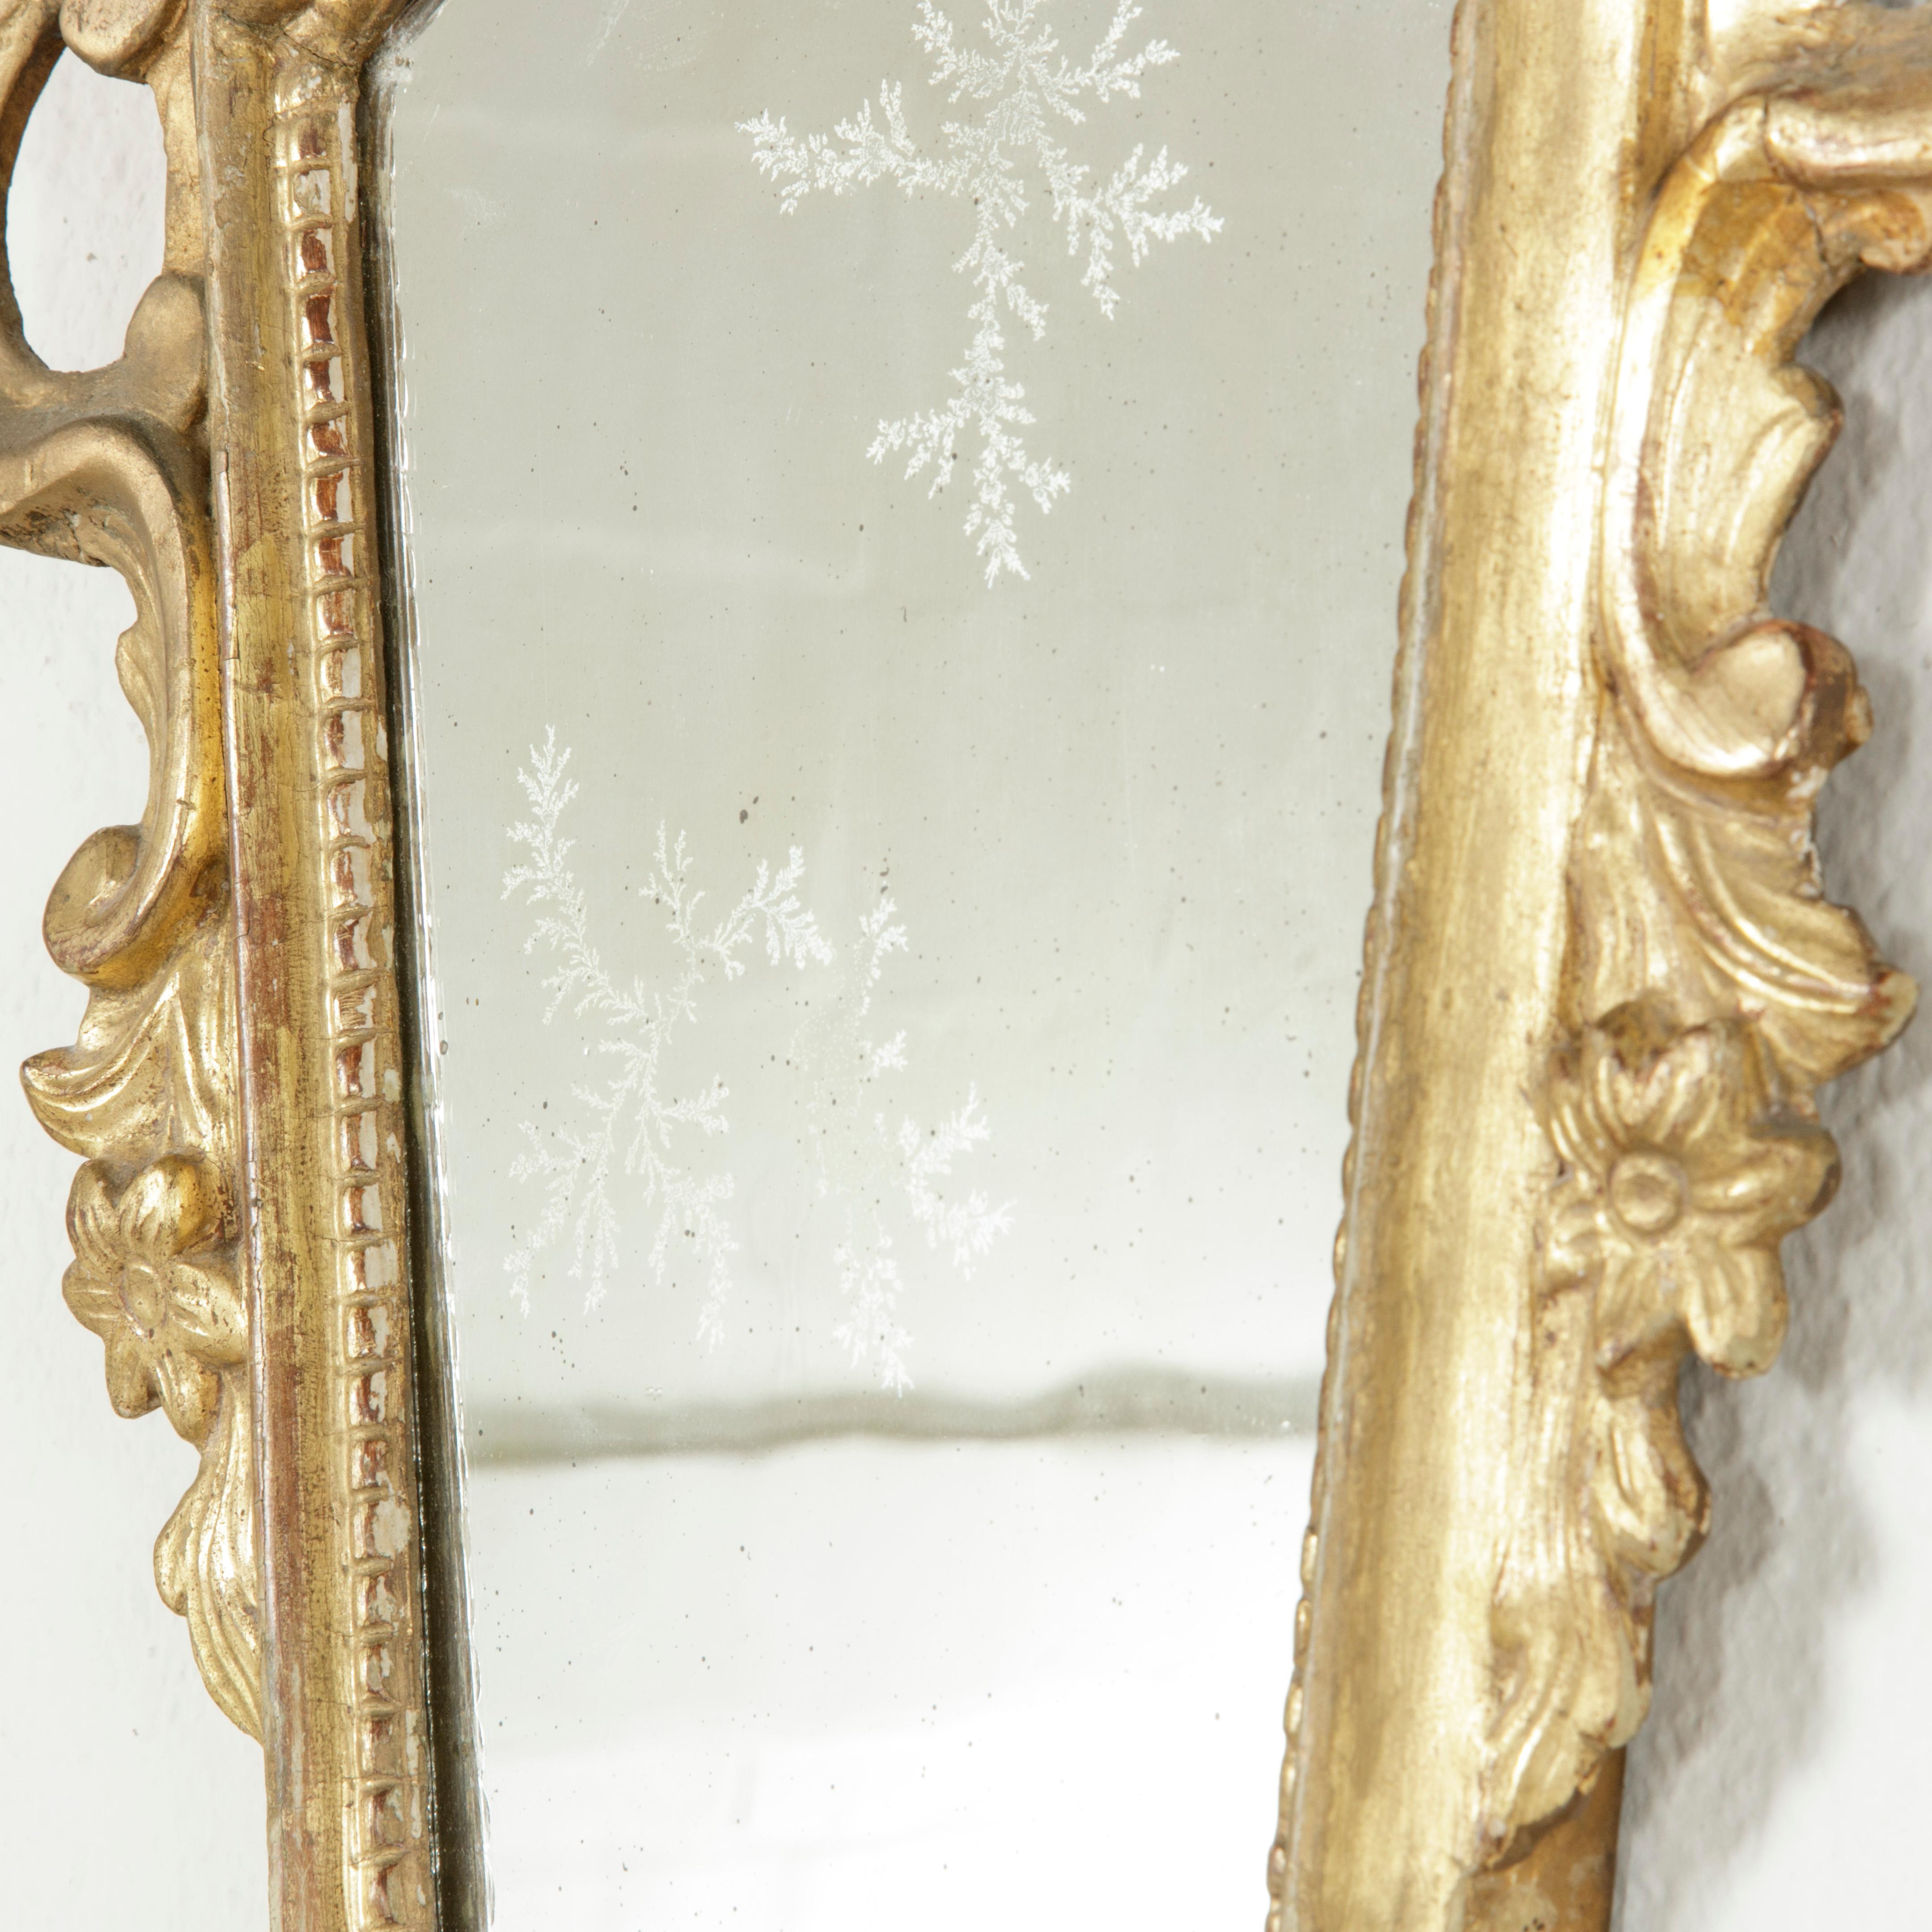 Early 18th Century French Regency Period Giltwood Mirror with Mercury Glass 4